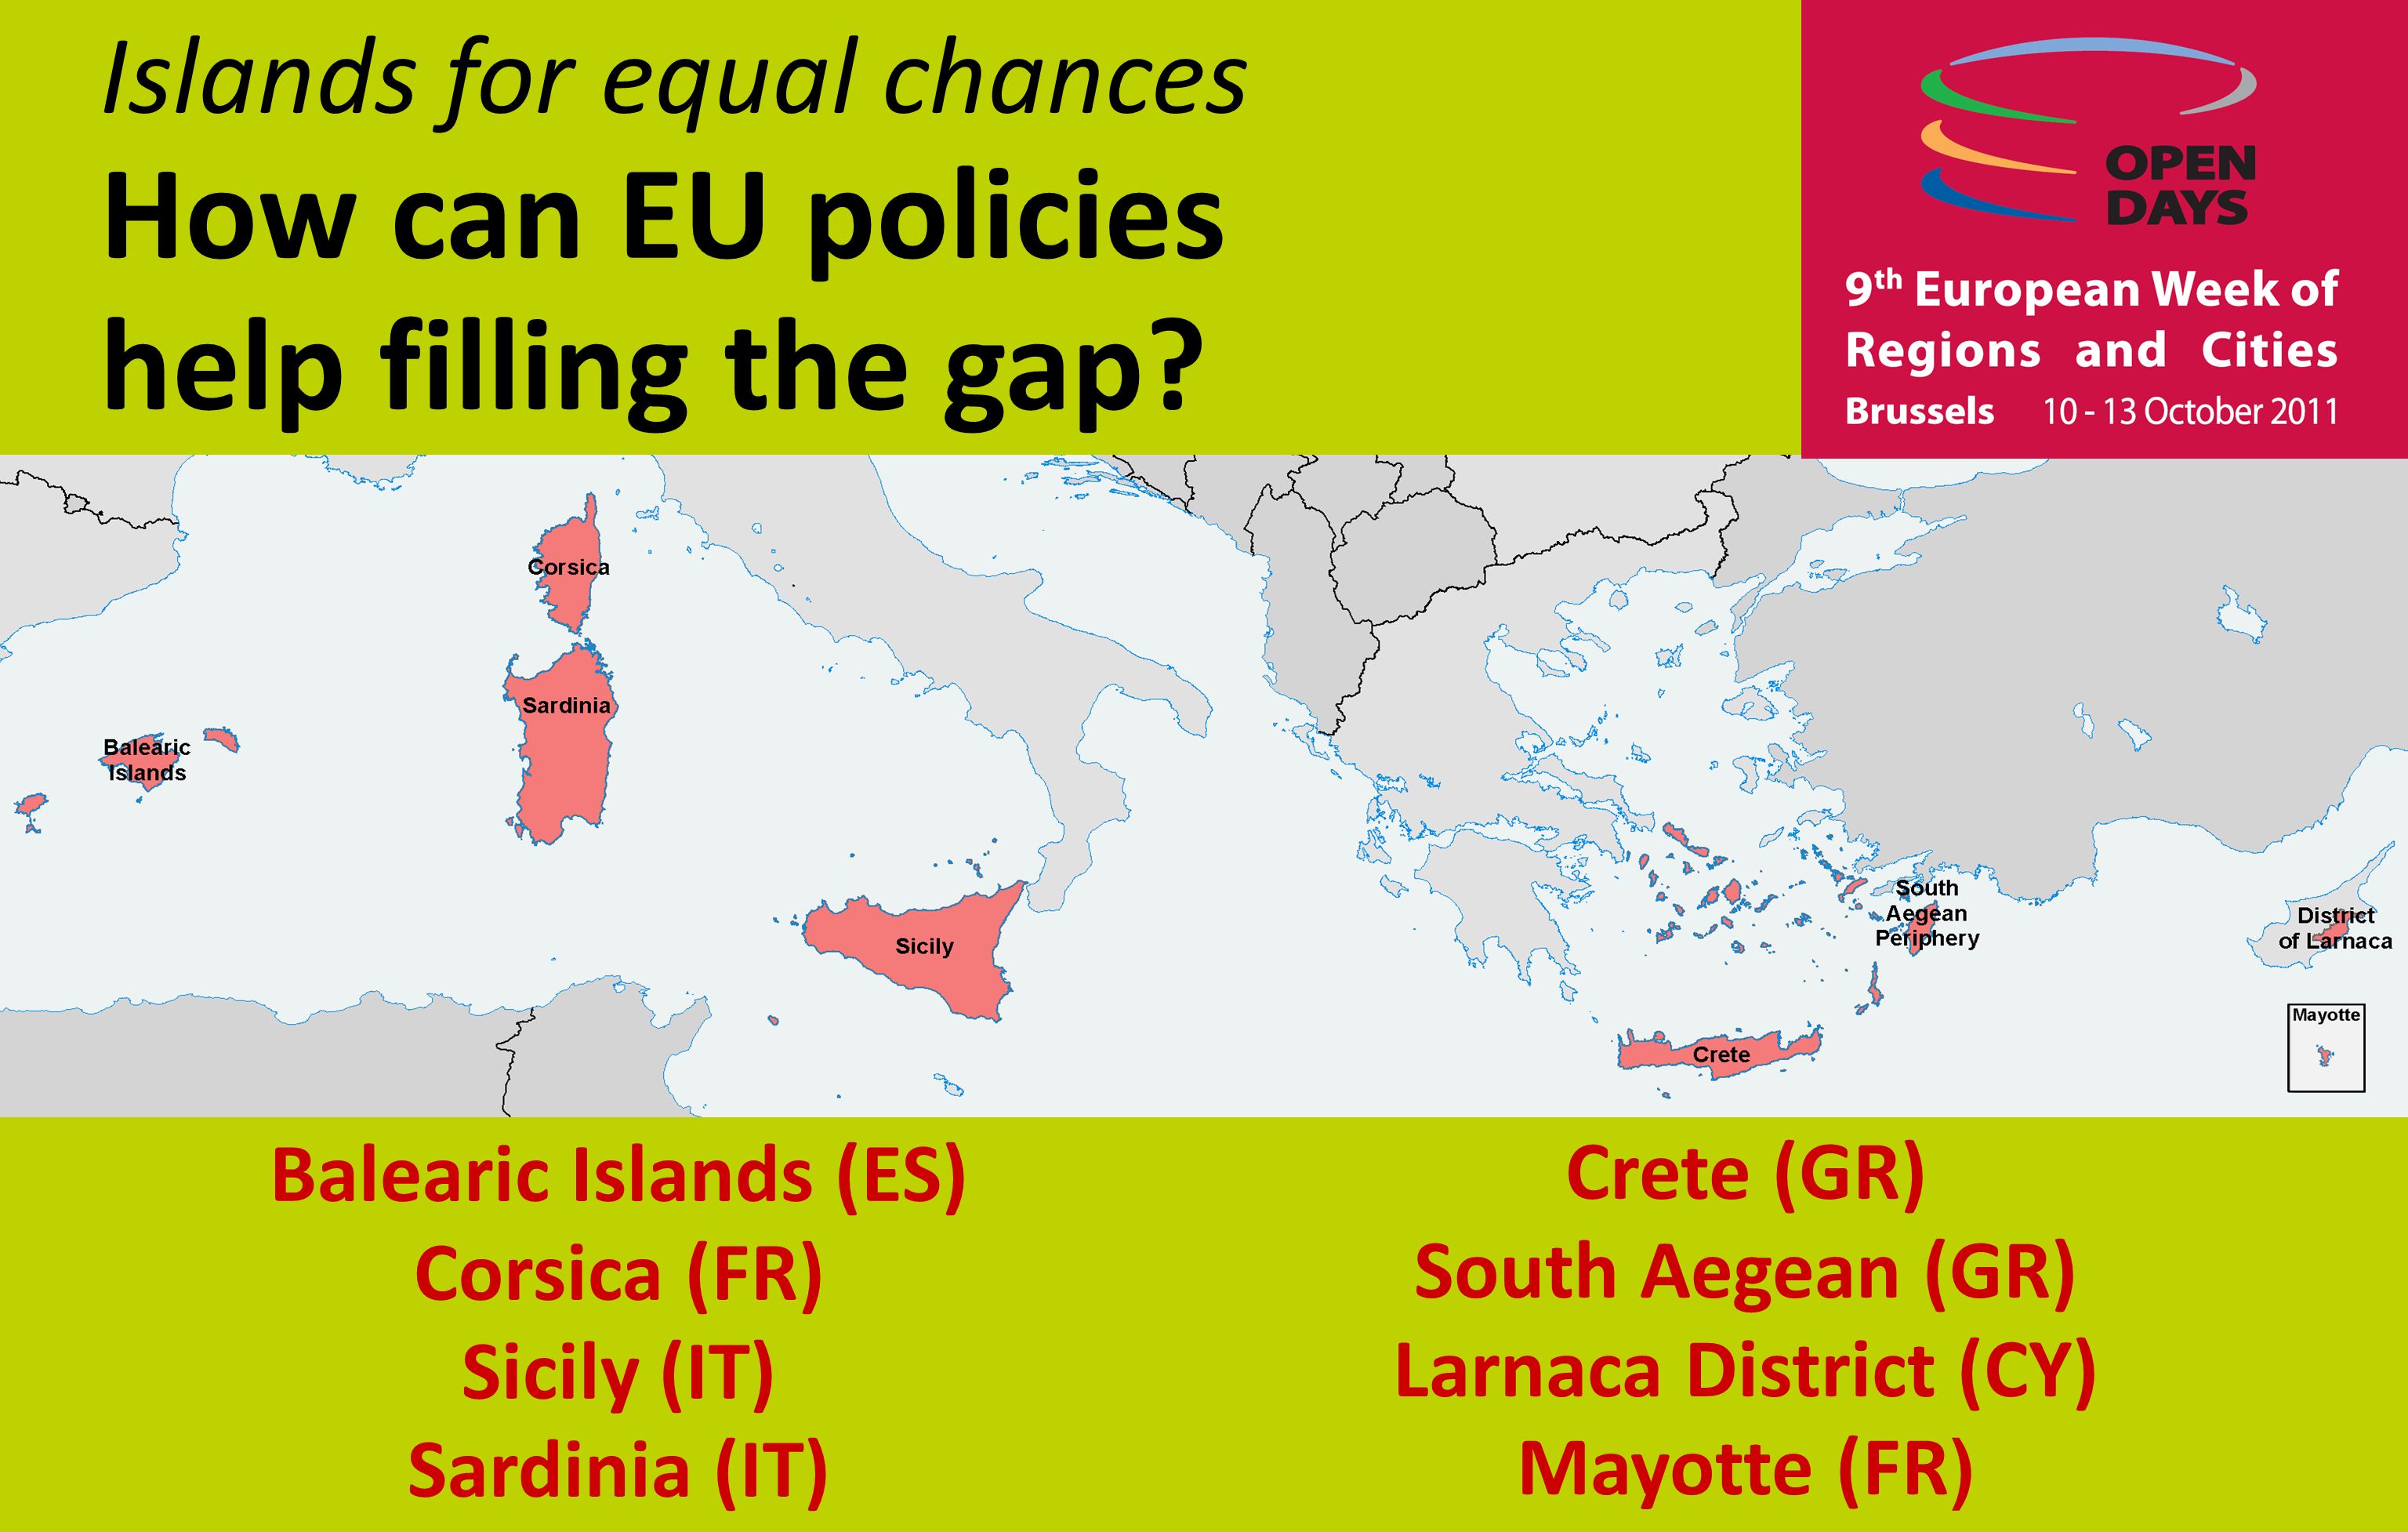 Islands for equal chances How can EU policies help filling the gap?  Balearic Islands (ES) Corsica (FR) Sicily (IT) Sardinia (IT) Crete (GR)  South Aegean. - ppt download